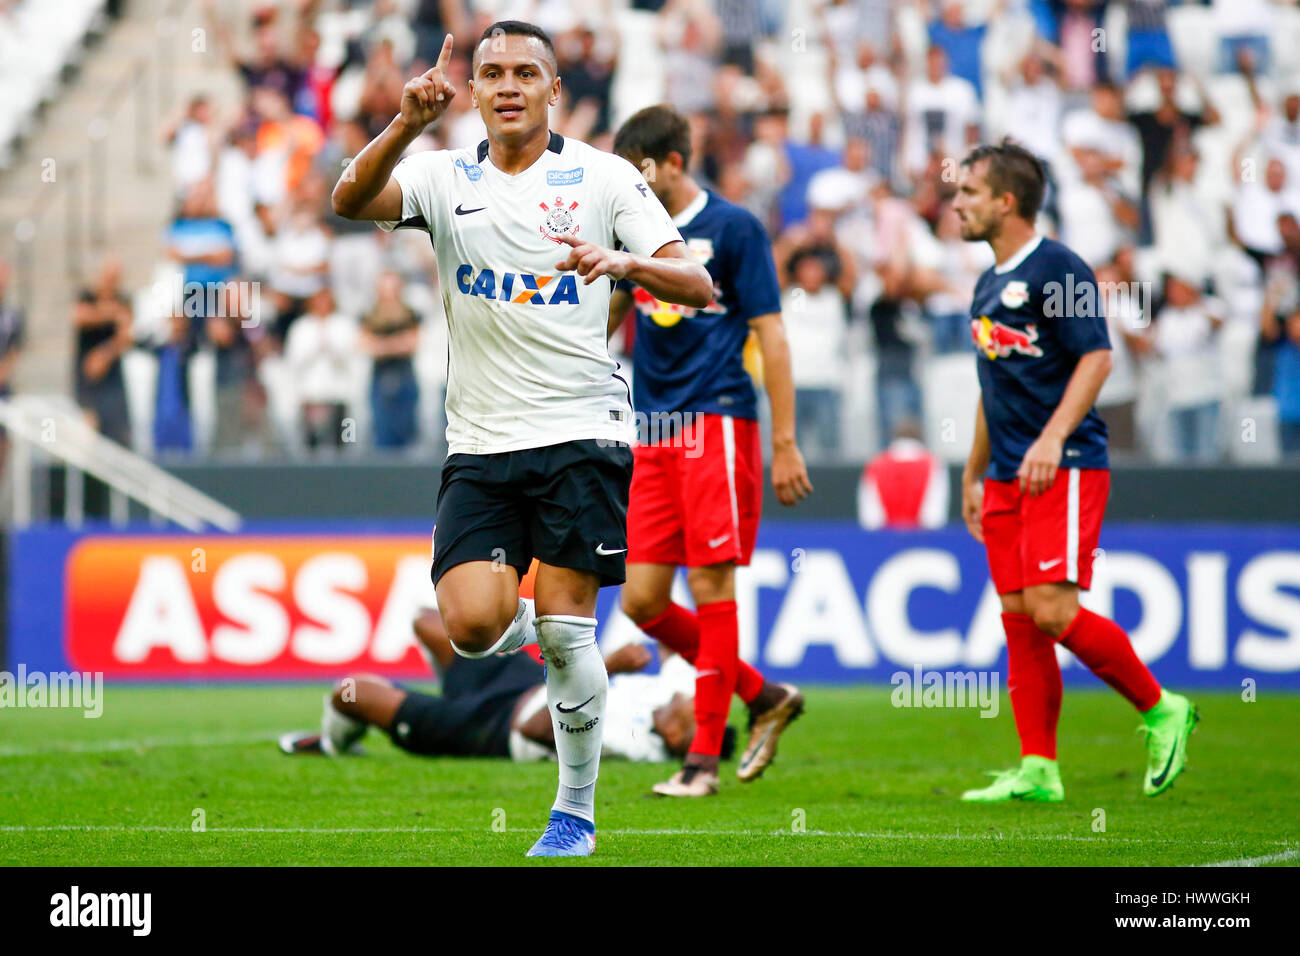 SÃO PAULO, SP - 23.03.2017: CORINTHIANS X RED BULL BRASIL - Léo Jabá complains offside during the match between Corinthians and Red Bull Brazil held in Arena Corinthians, East Zone of São Paulo. The match is valid for the 10th round of the 2017 Paulistão Itaipava. (Photo: Marco Galvão/Fotoarena) Stock Photo